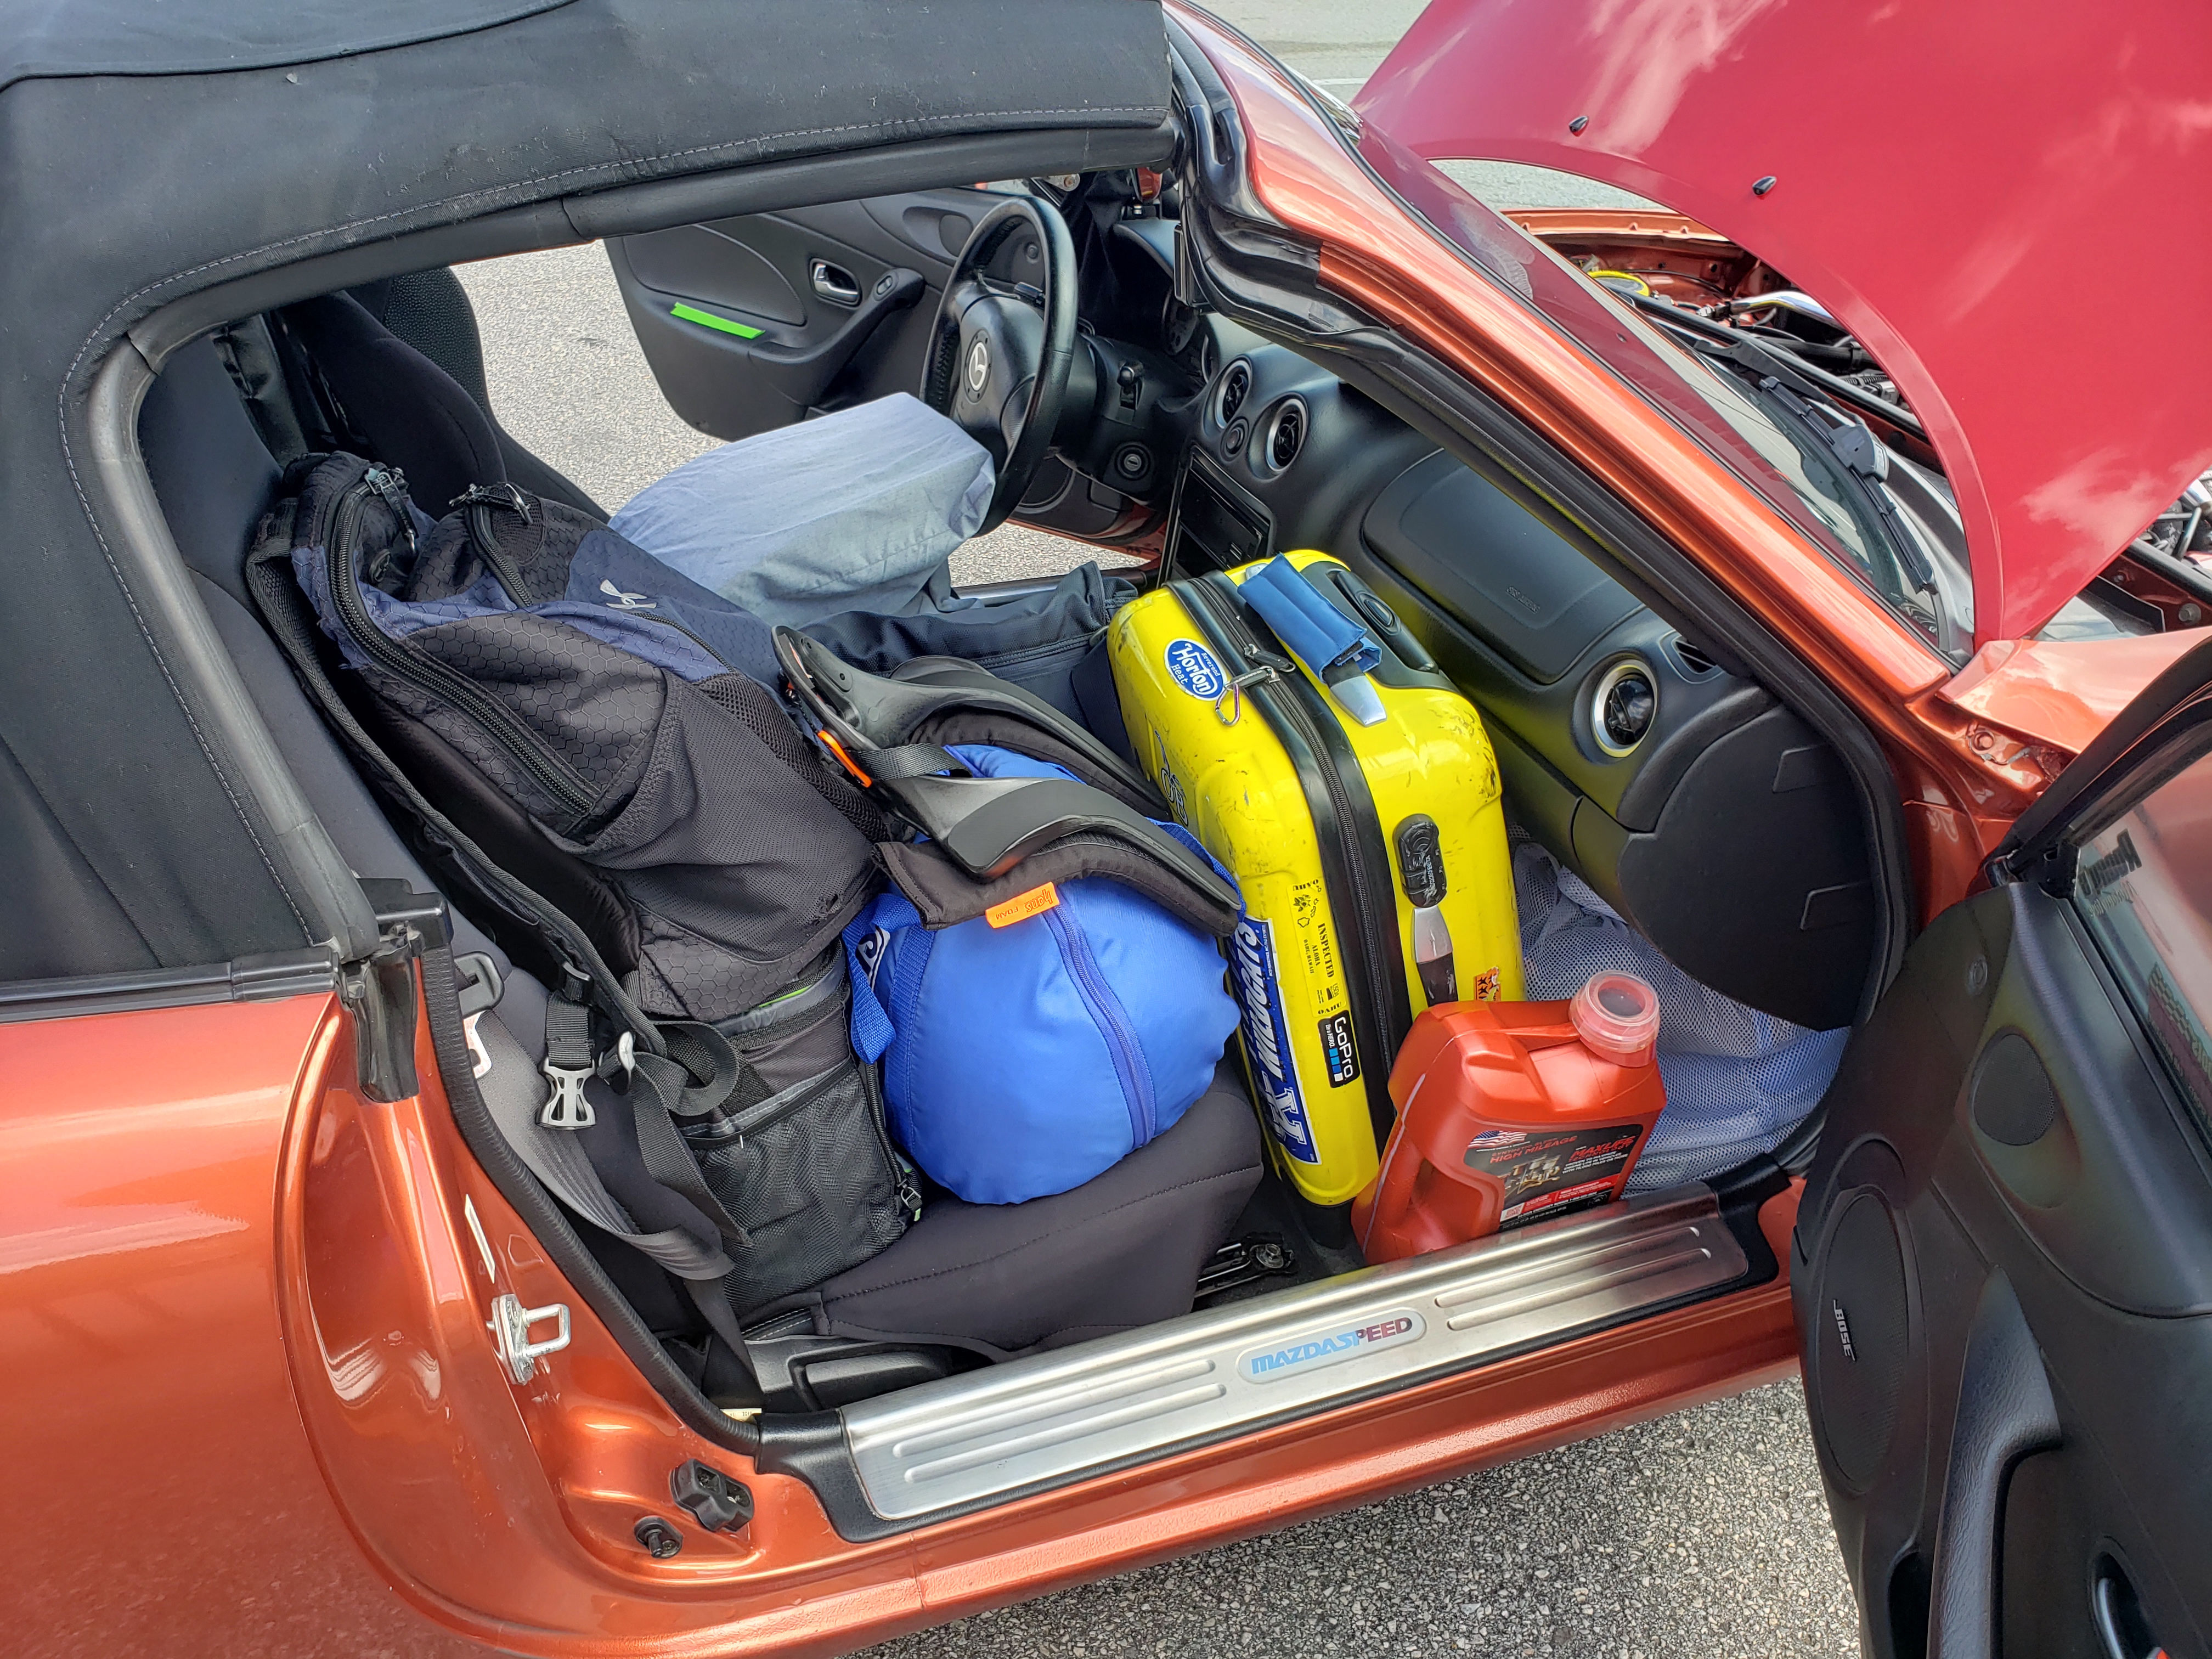 Full passenger seat. Blue bag for helmet. Yellow suitcase (carry-on size). Cooler, backpack, extra oil, and other items.